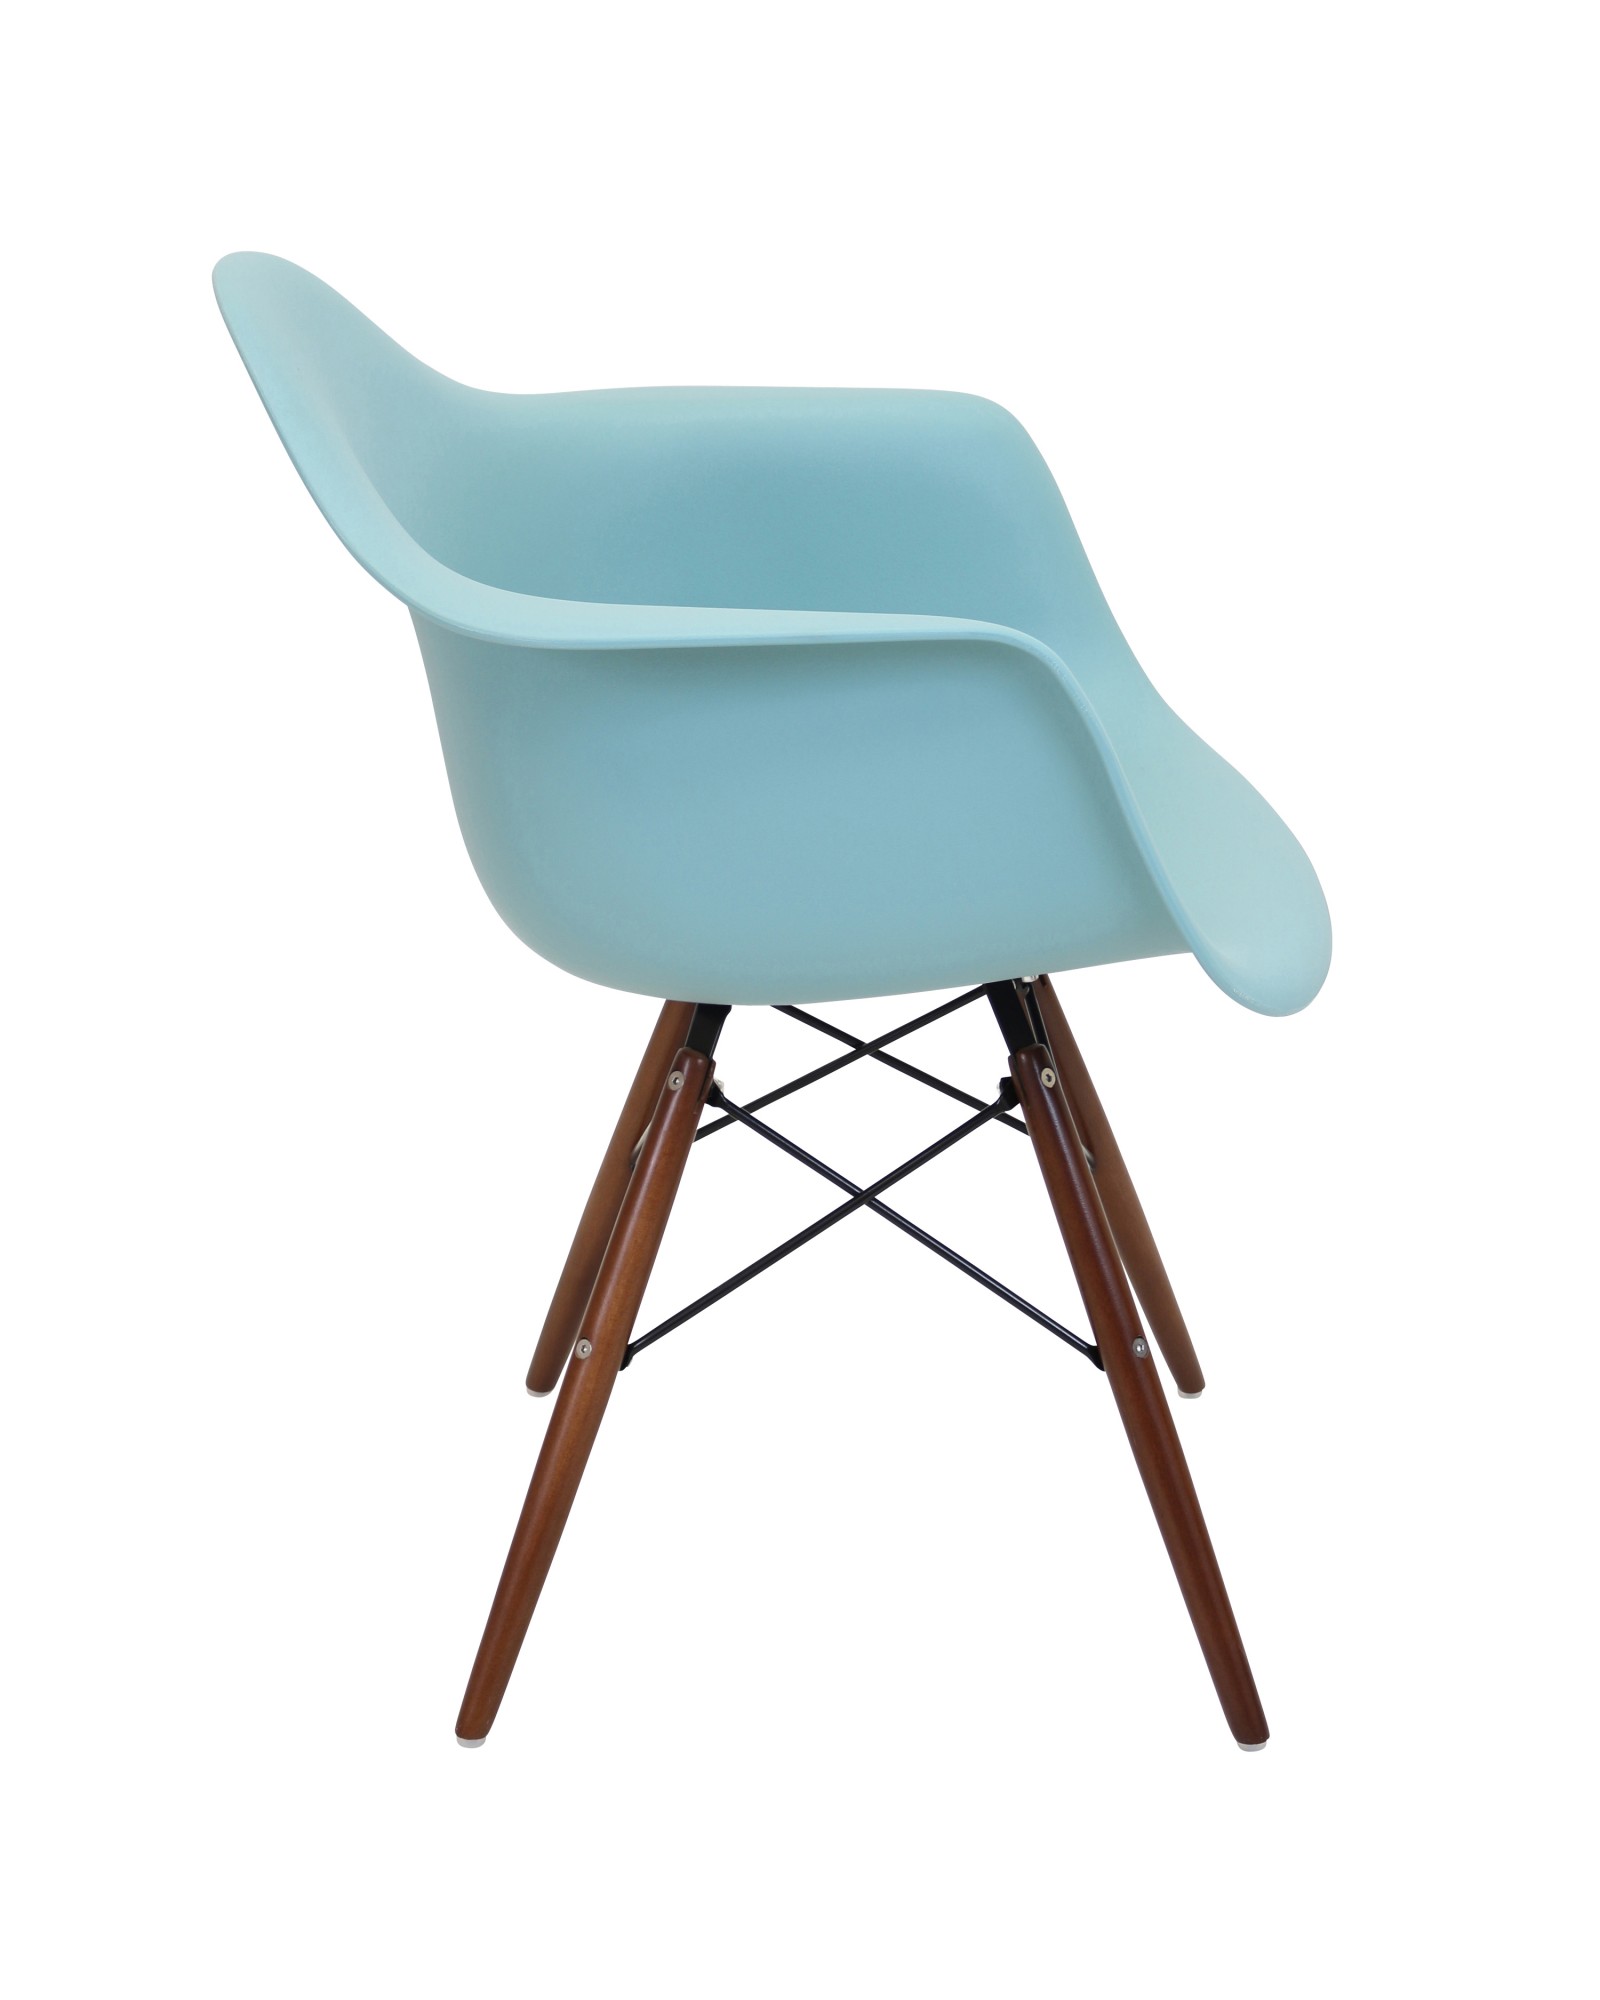 Neo Flair Mid-Century Modern Chair in Sea Green and Espresso - Set of 2